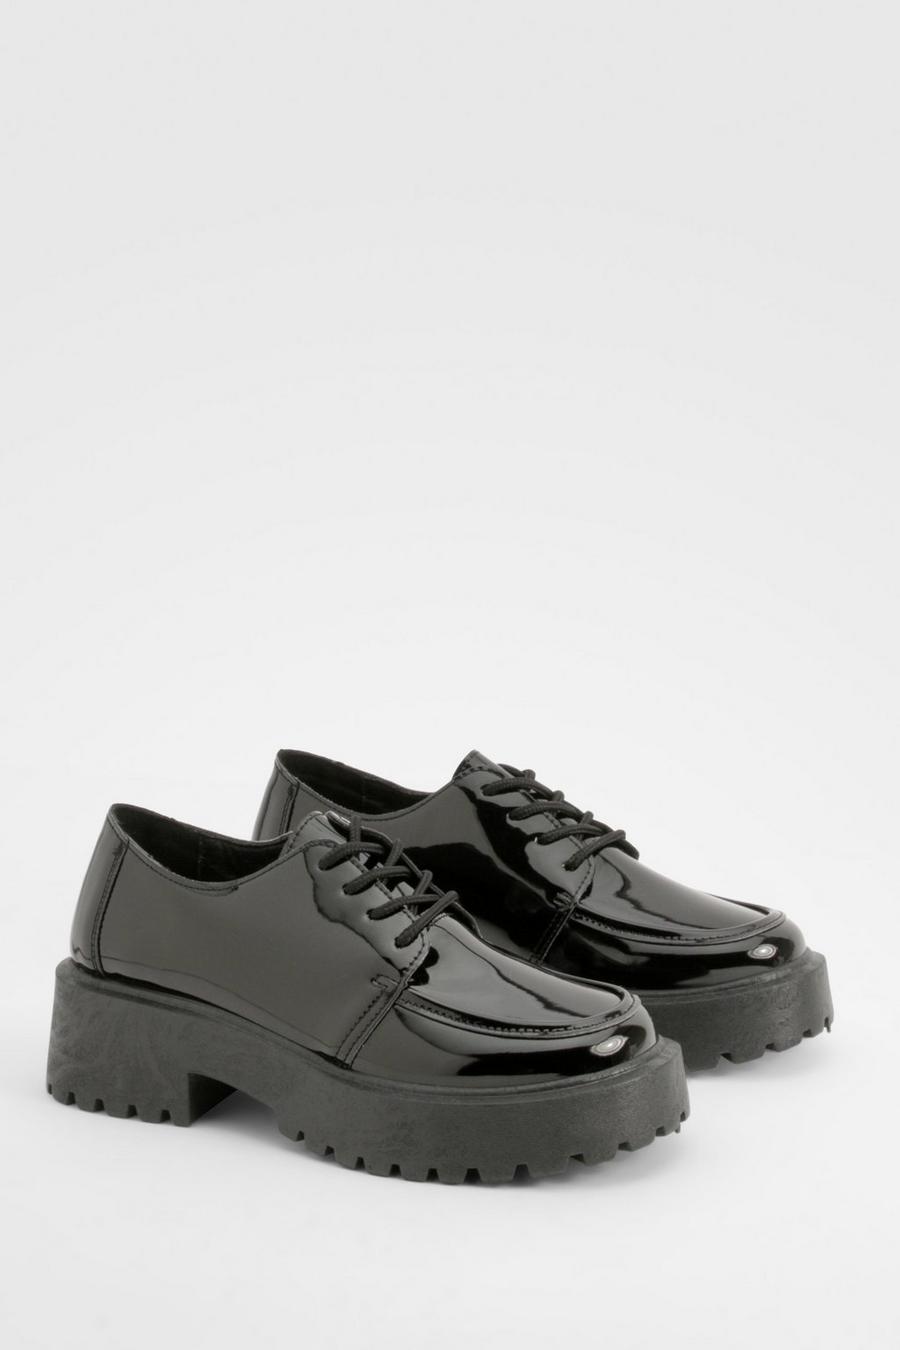 Black Patent  Lace Up Chunky Sole Shoes